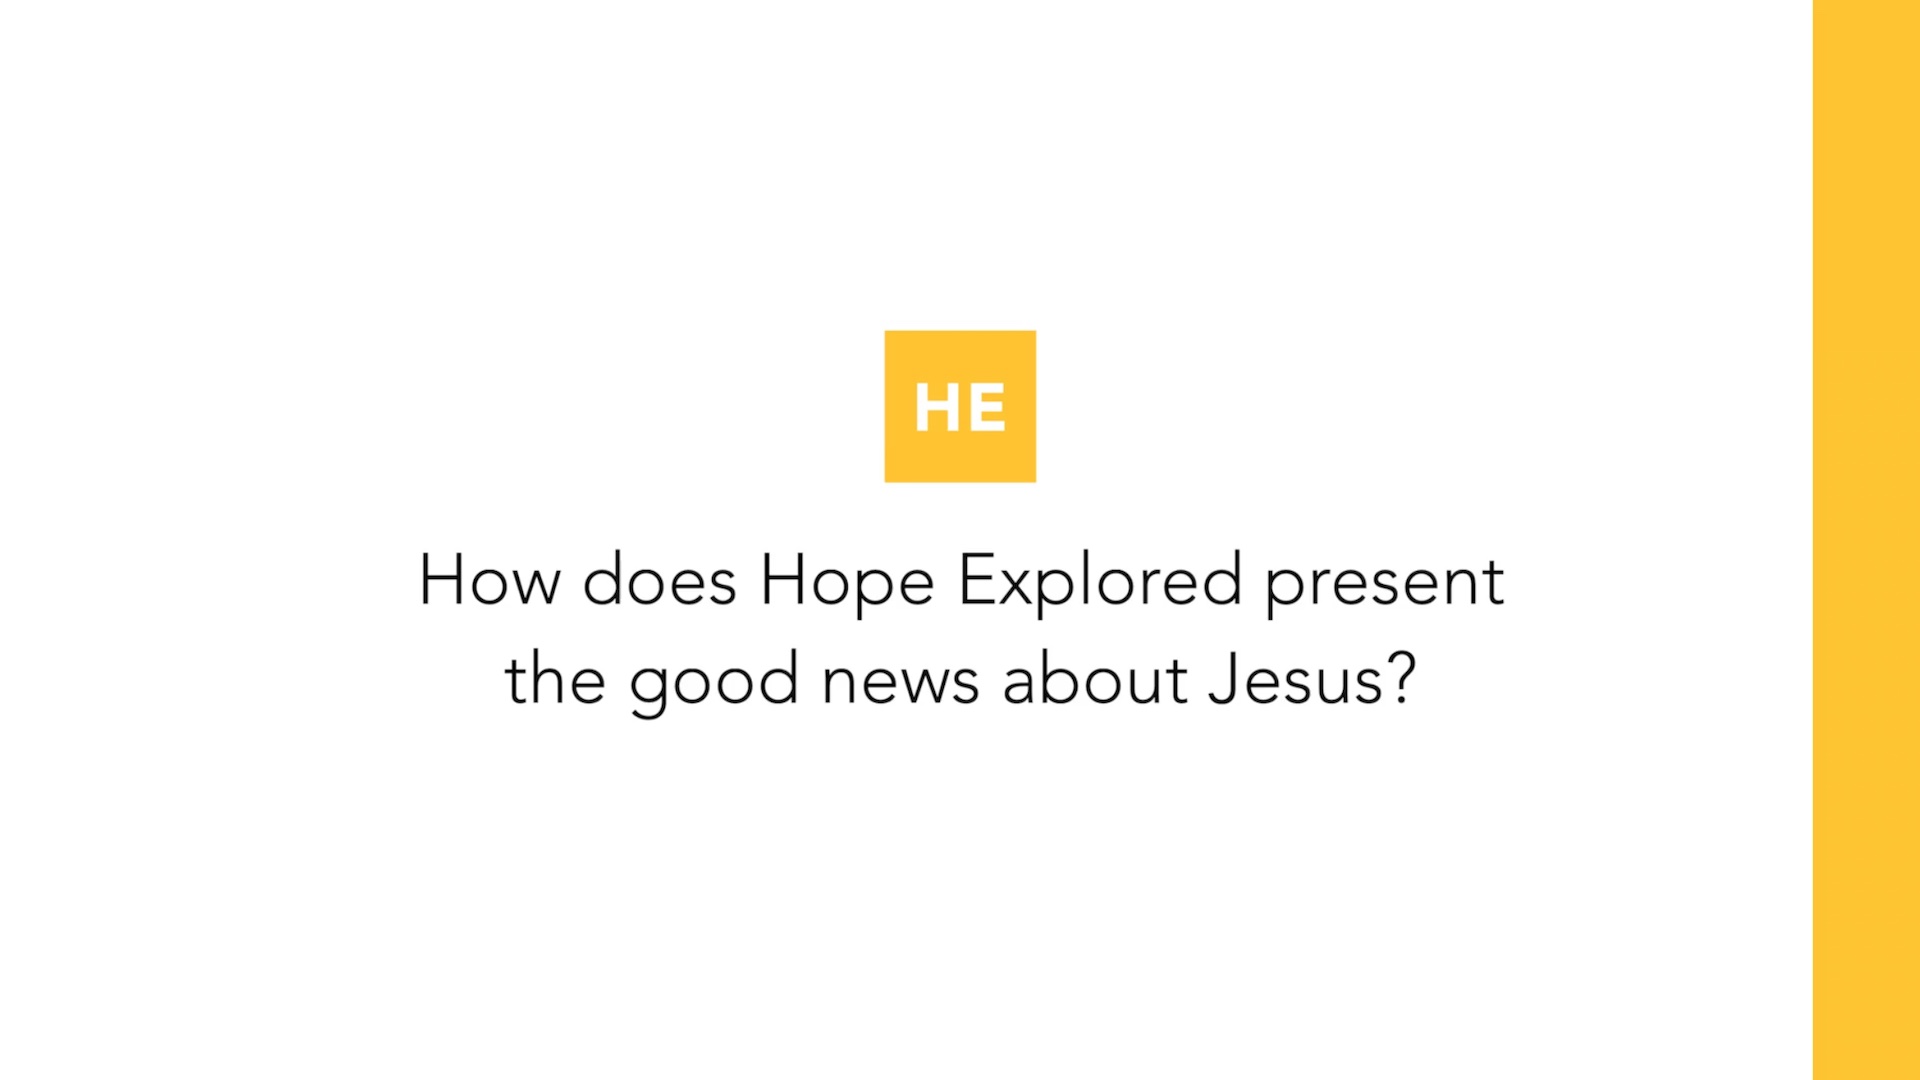 How does Hope Explored present the good news about Jesus?